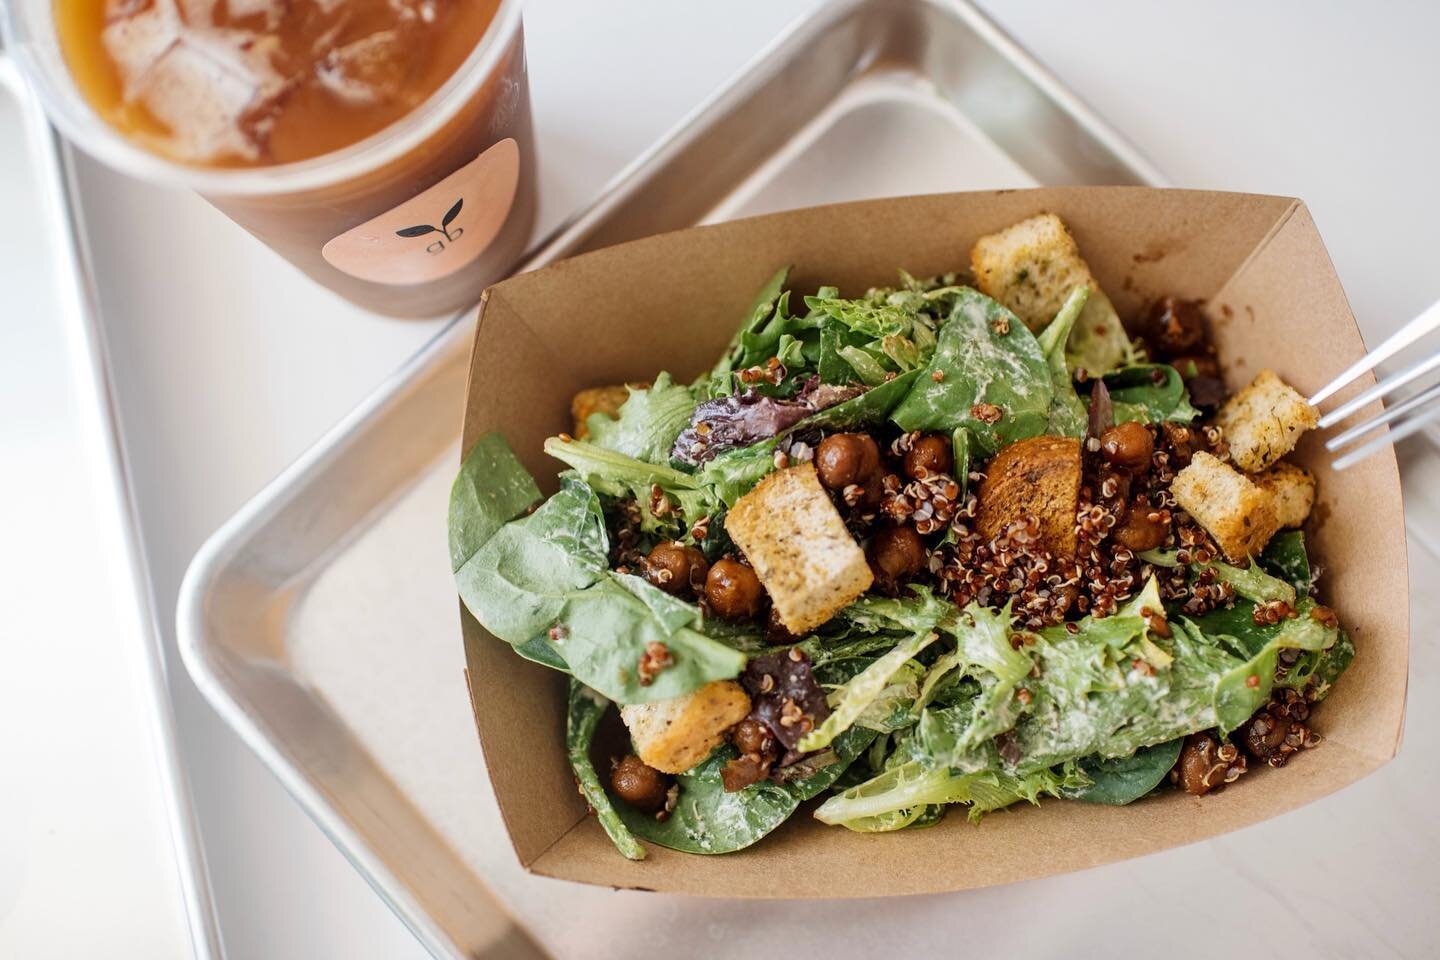 everyone&rsquo;s favorite salad &mdash; quinoa caesar salad 

our photographer: @hopsandhitched / @bbrittanypaige